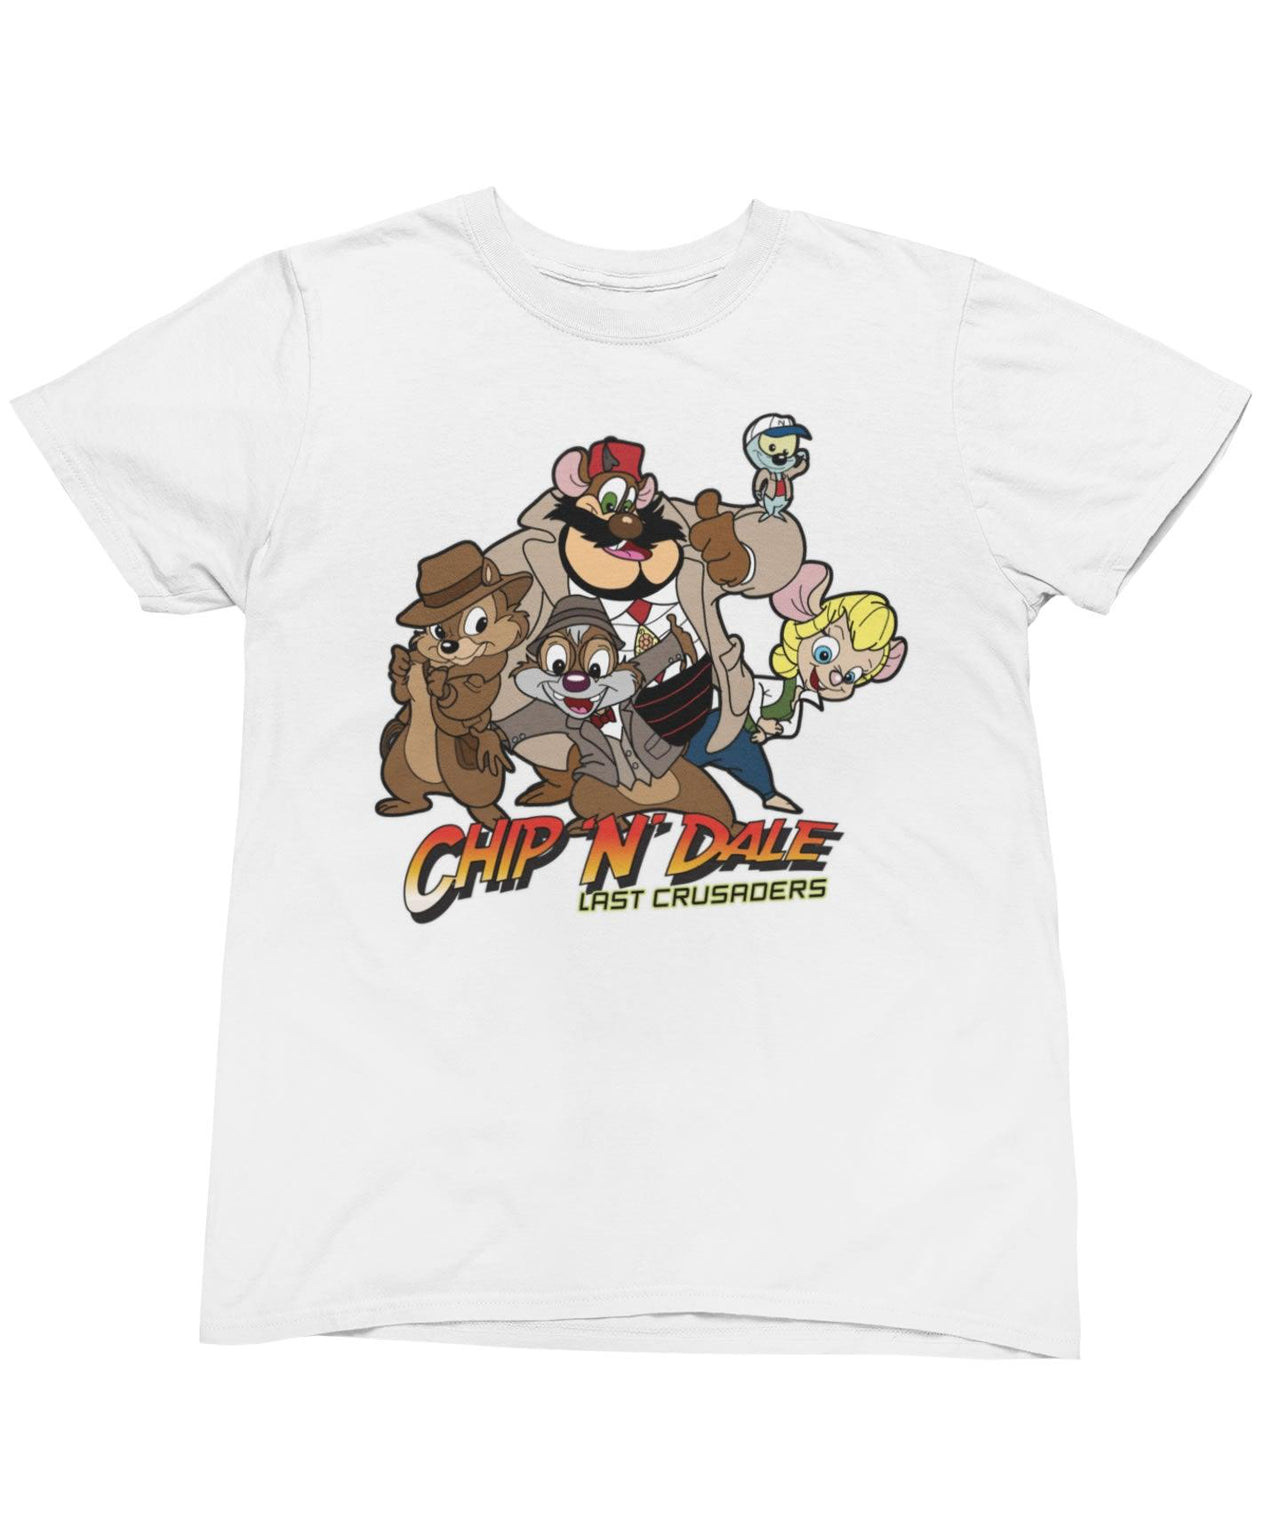 Top Notchy Chip N Dale Last Crusaders Men's/Unisex Mens Graphic T-Shirt 8Ball